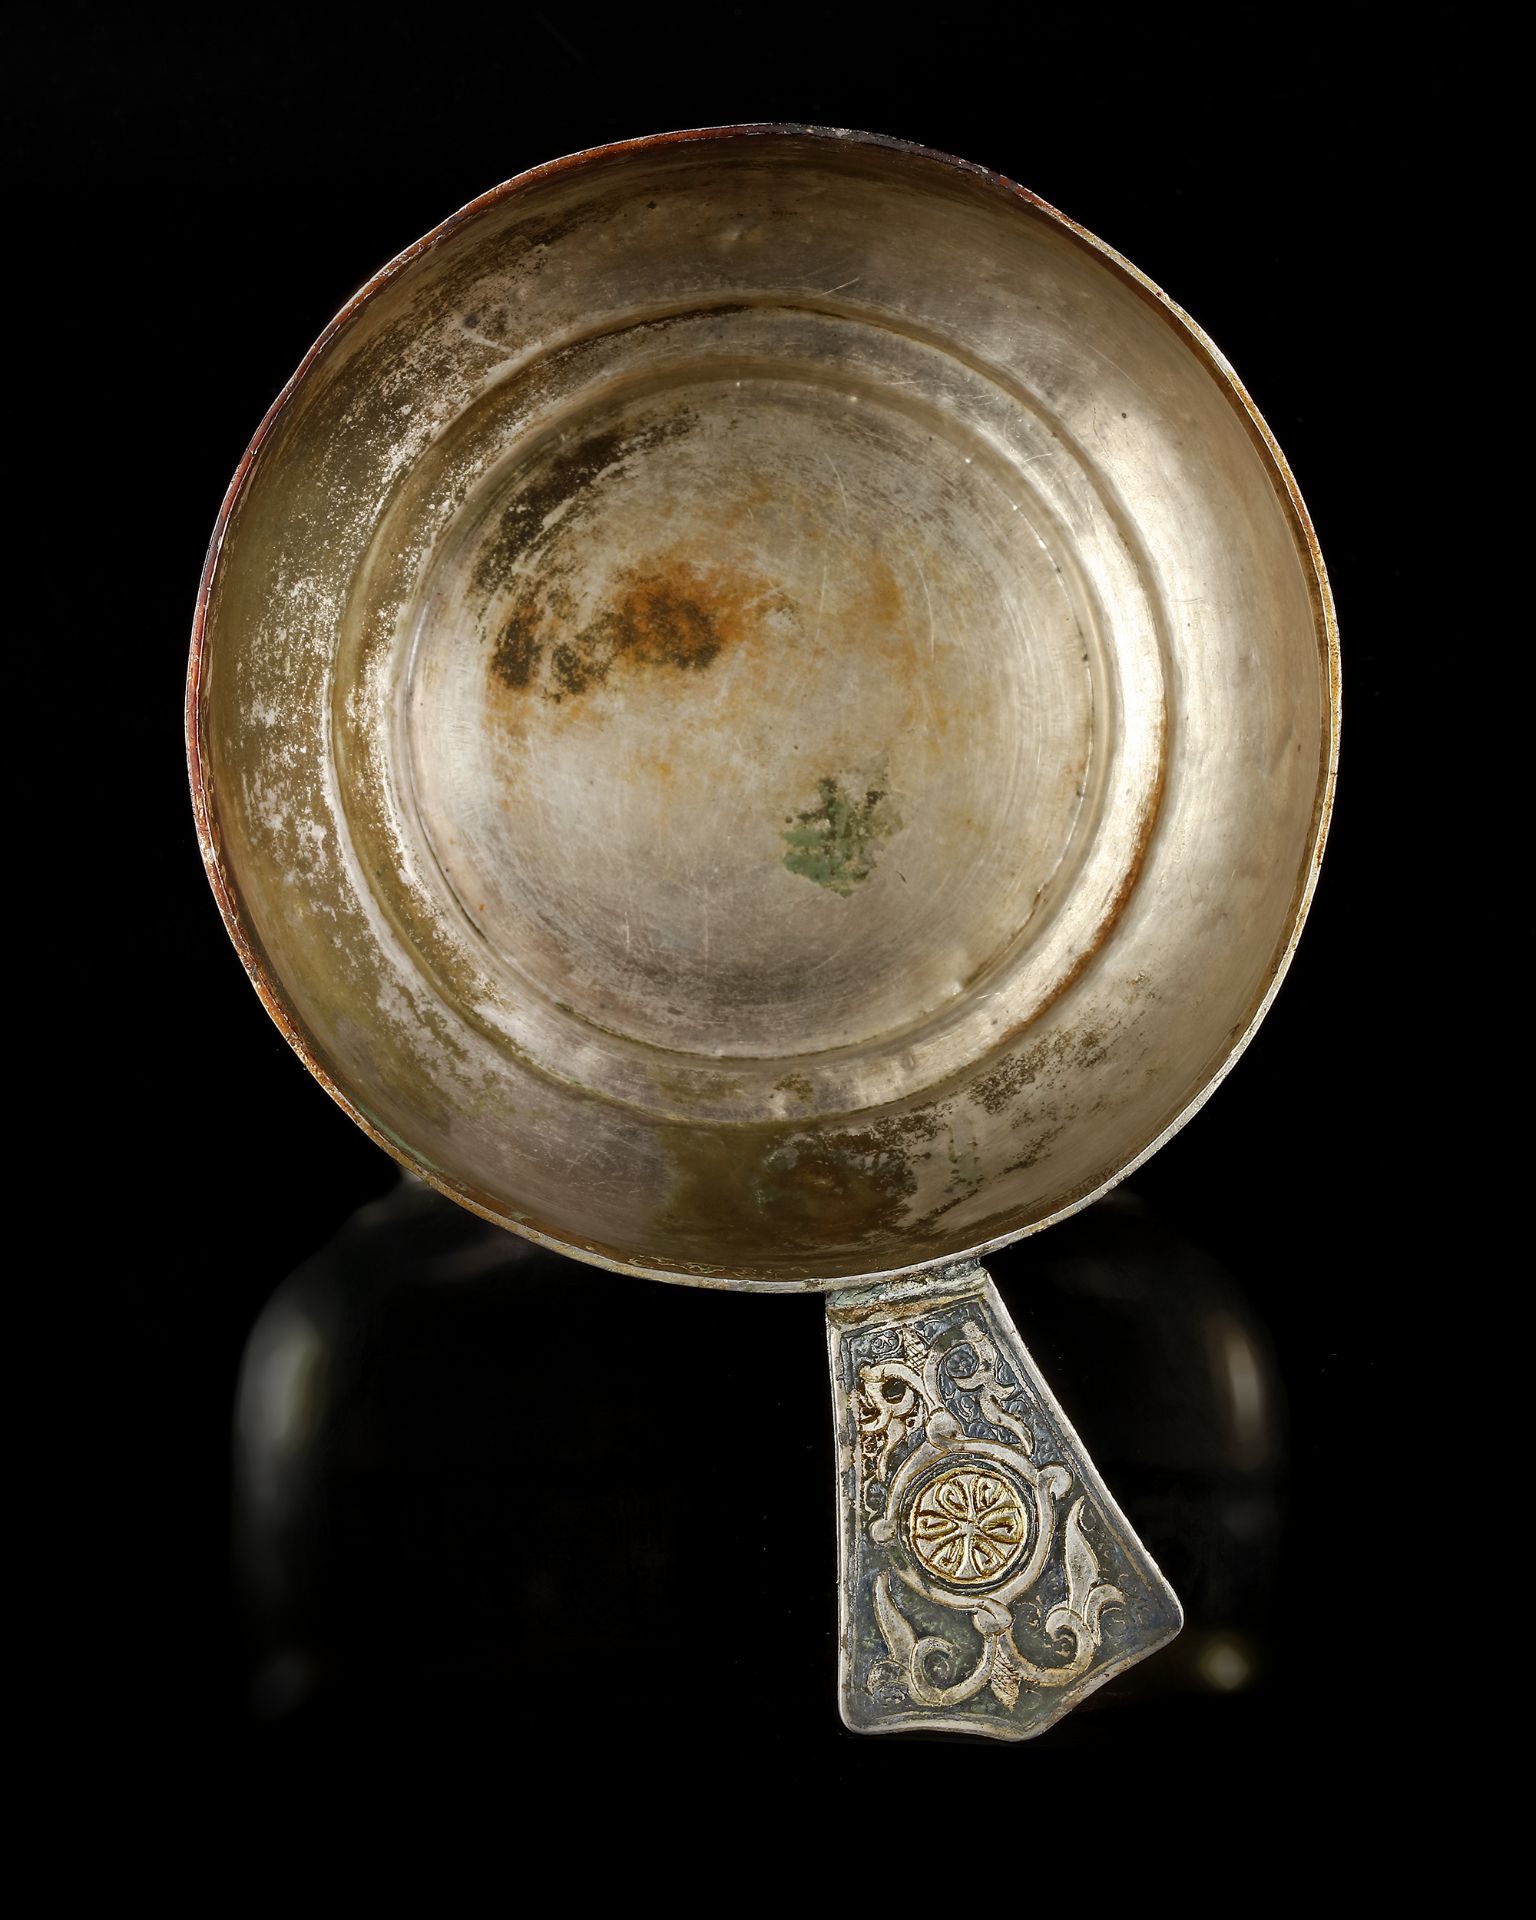 A RARE SILVER AND NIELLOED CUP WITH KUFIC INSCRIPTION, PERSIA OR CENTRAL ASIA, 11TH-12TH CENTURY - Image 19 of 34